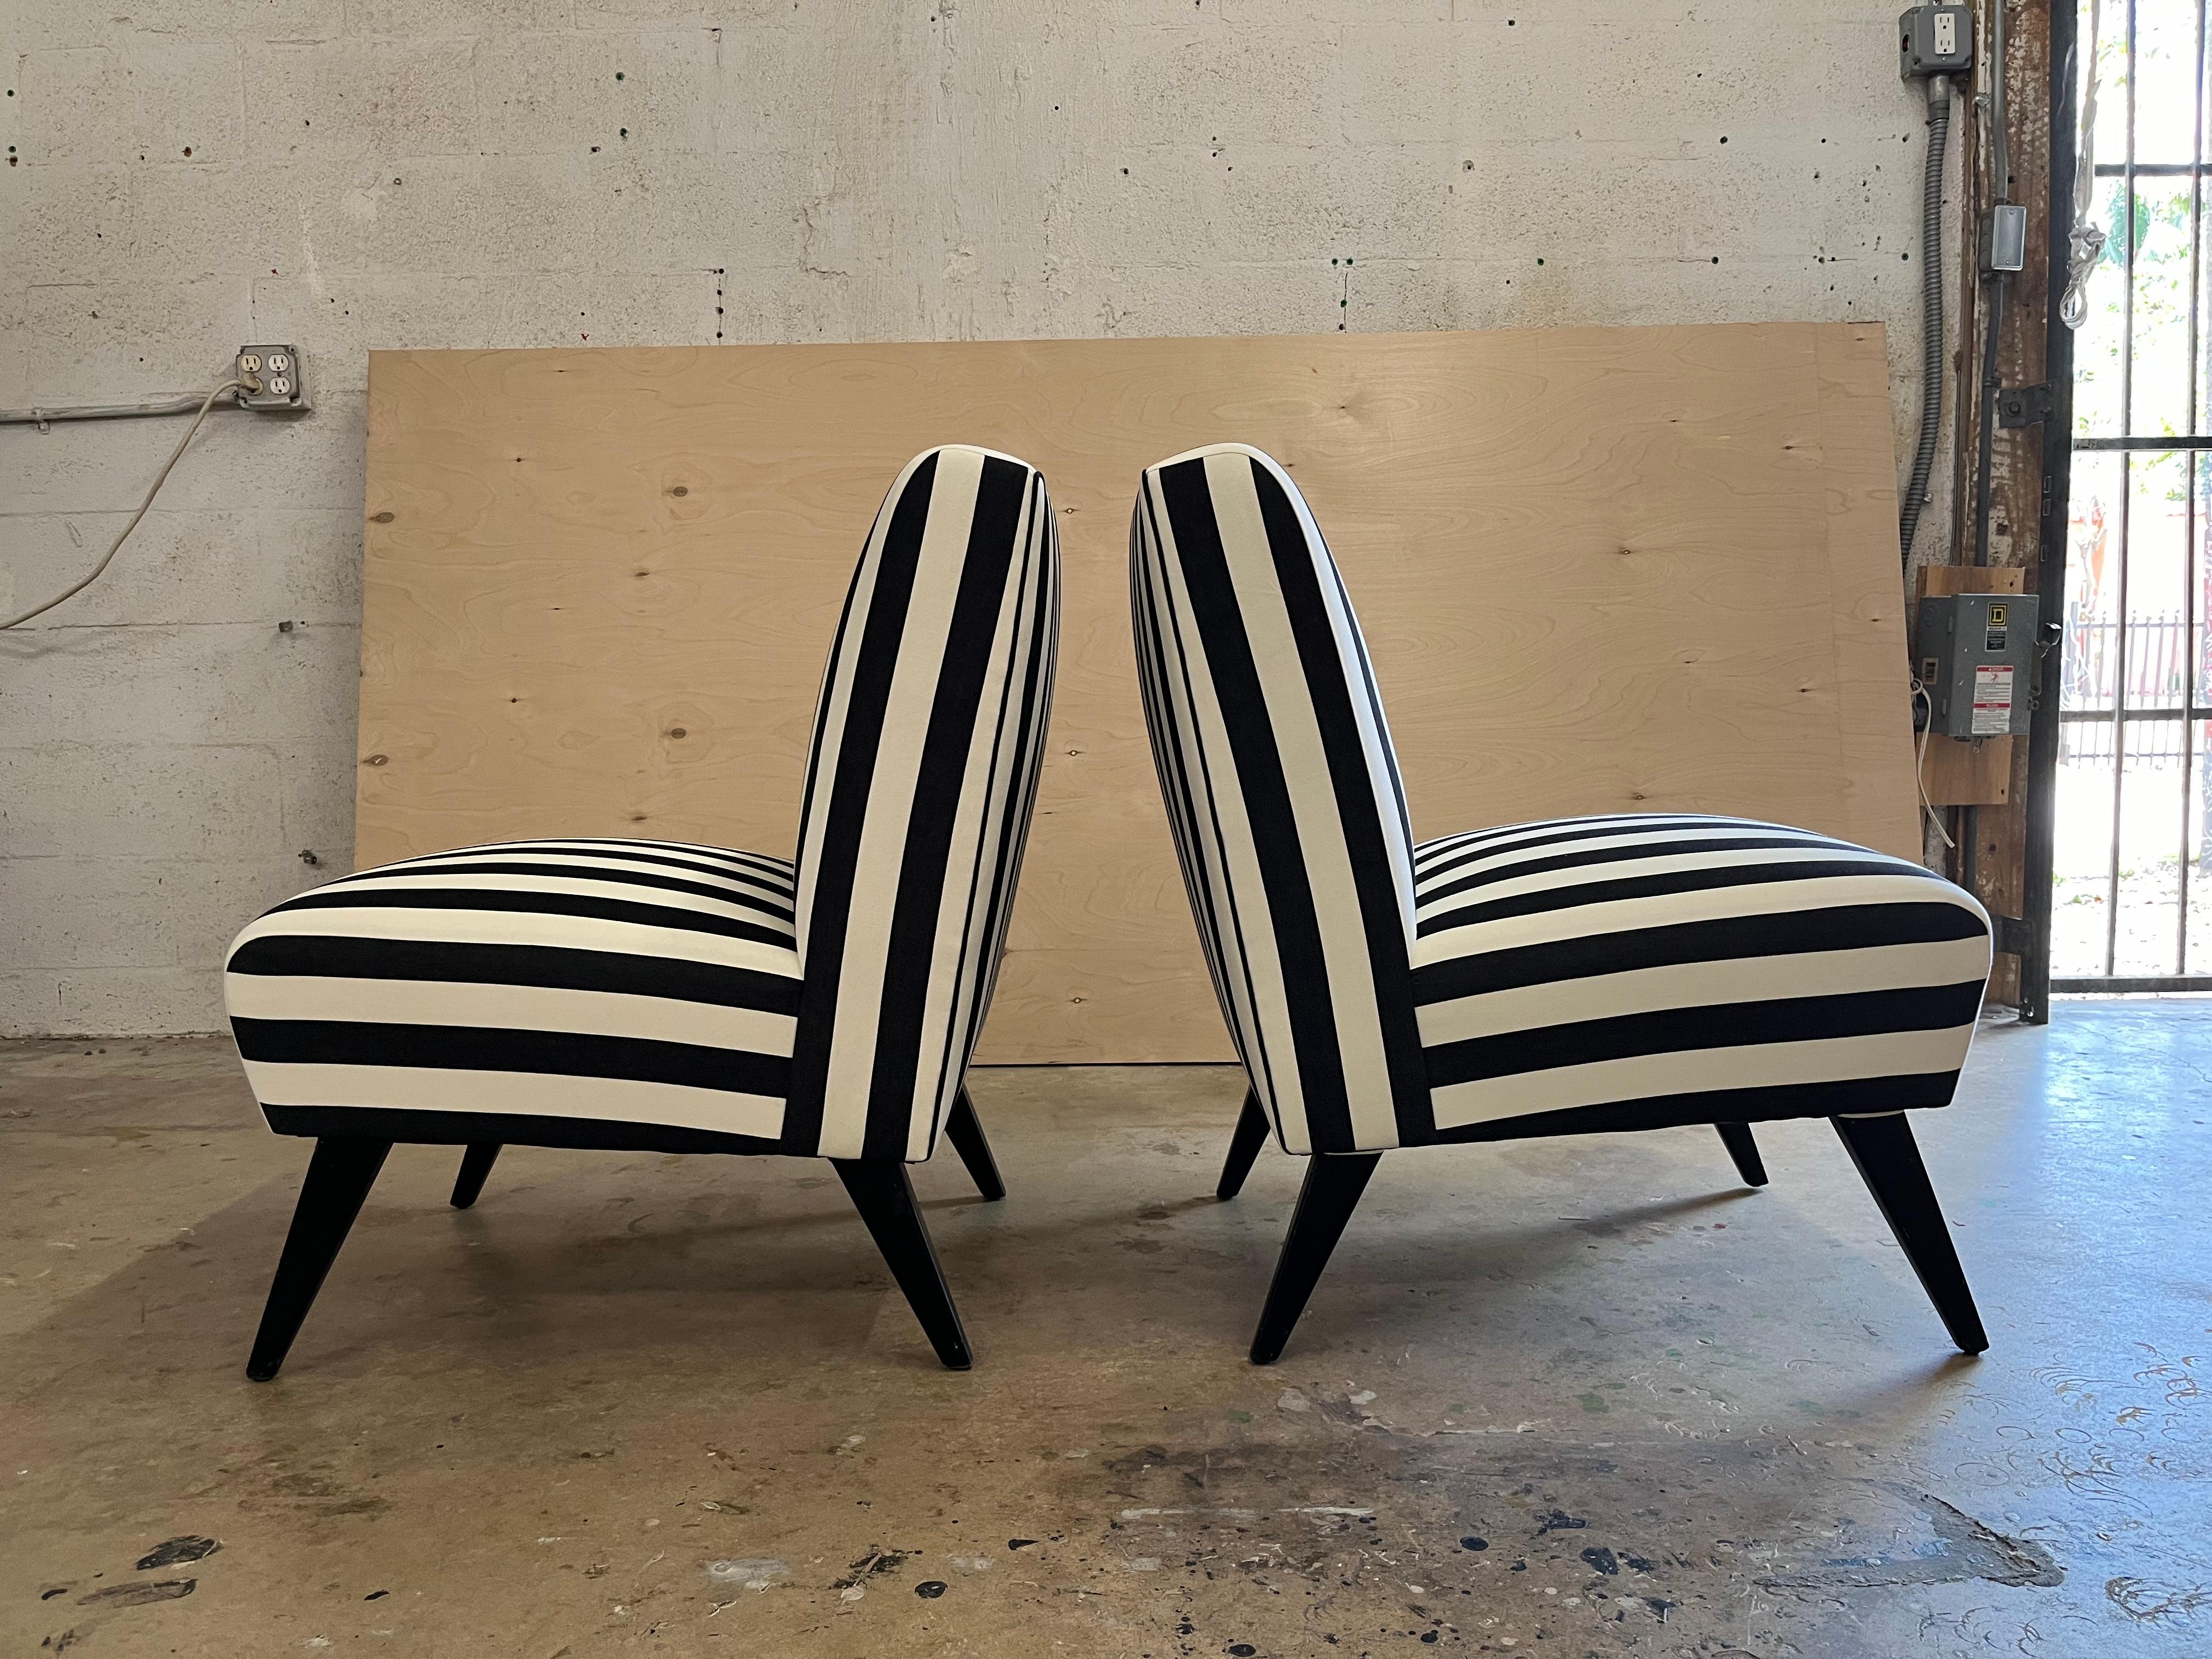 Pair of 1950s Lounge Chairs, black wooden legs and recently reupholstered in black and white striped cotton fabric. Chairs have original spring webbing. Ready for a new home. 